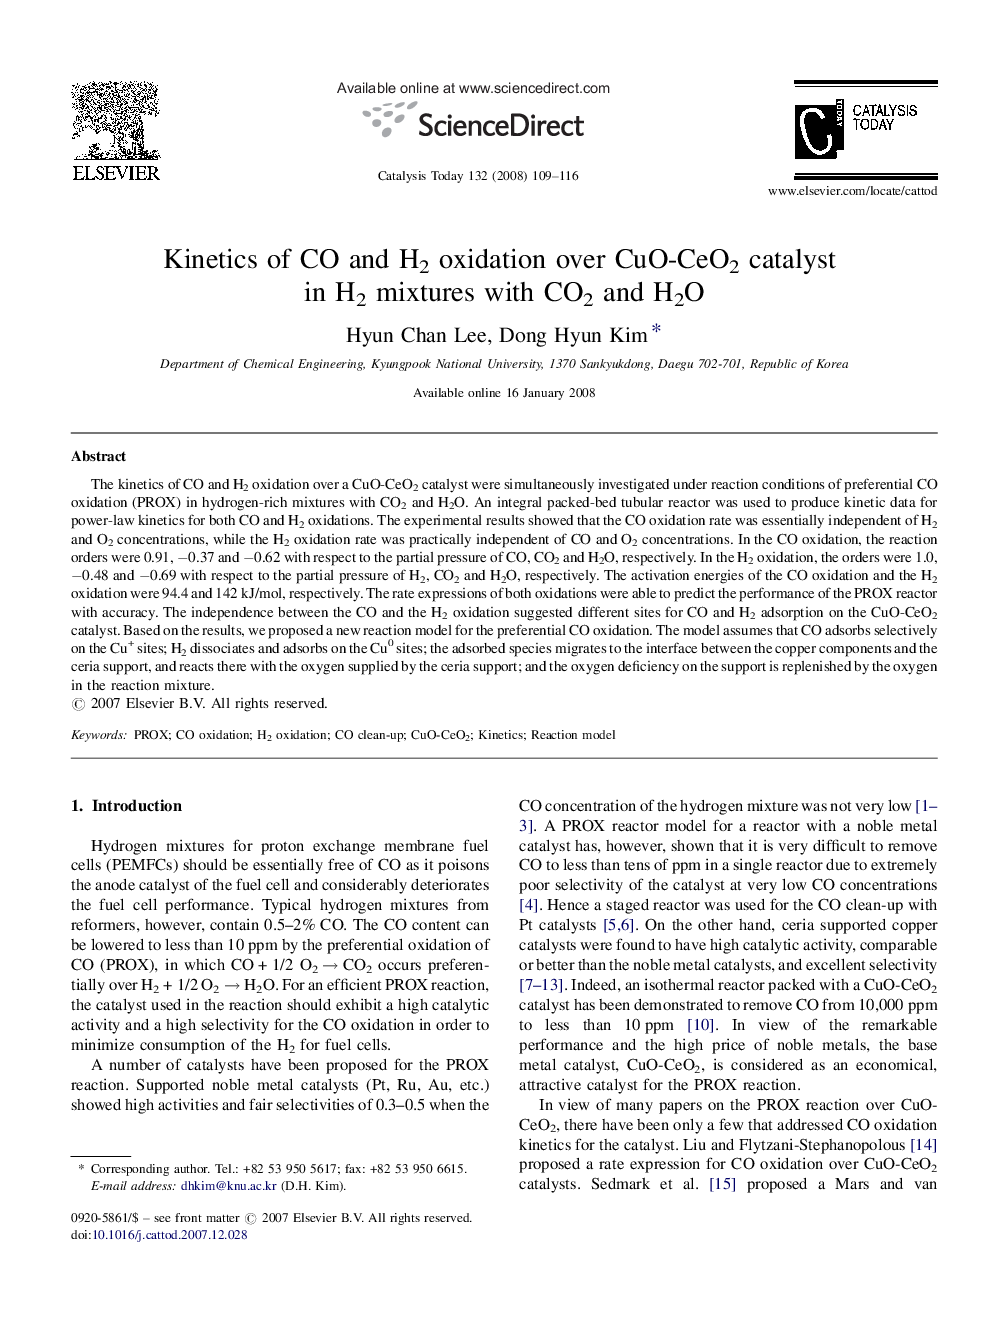 Kinetics of CO and H2 oxidation over CuO-CeO2 catalyst in H2 mixtures with CO2 and H2O